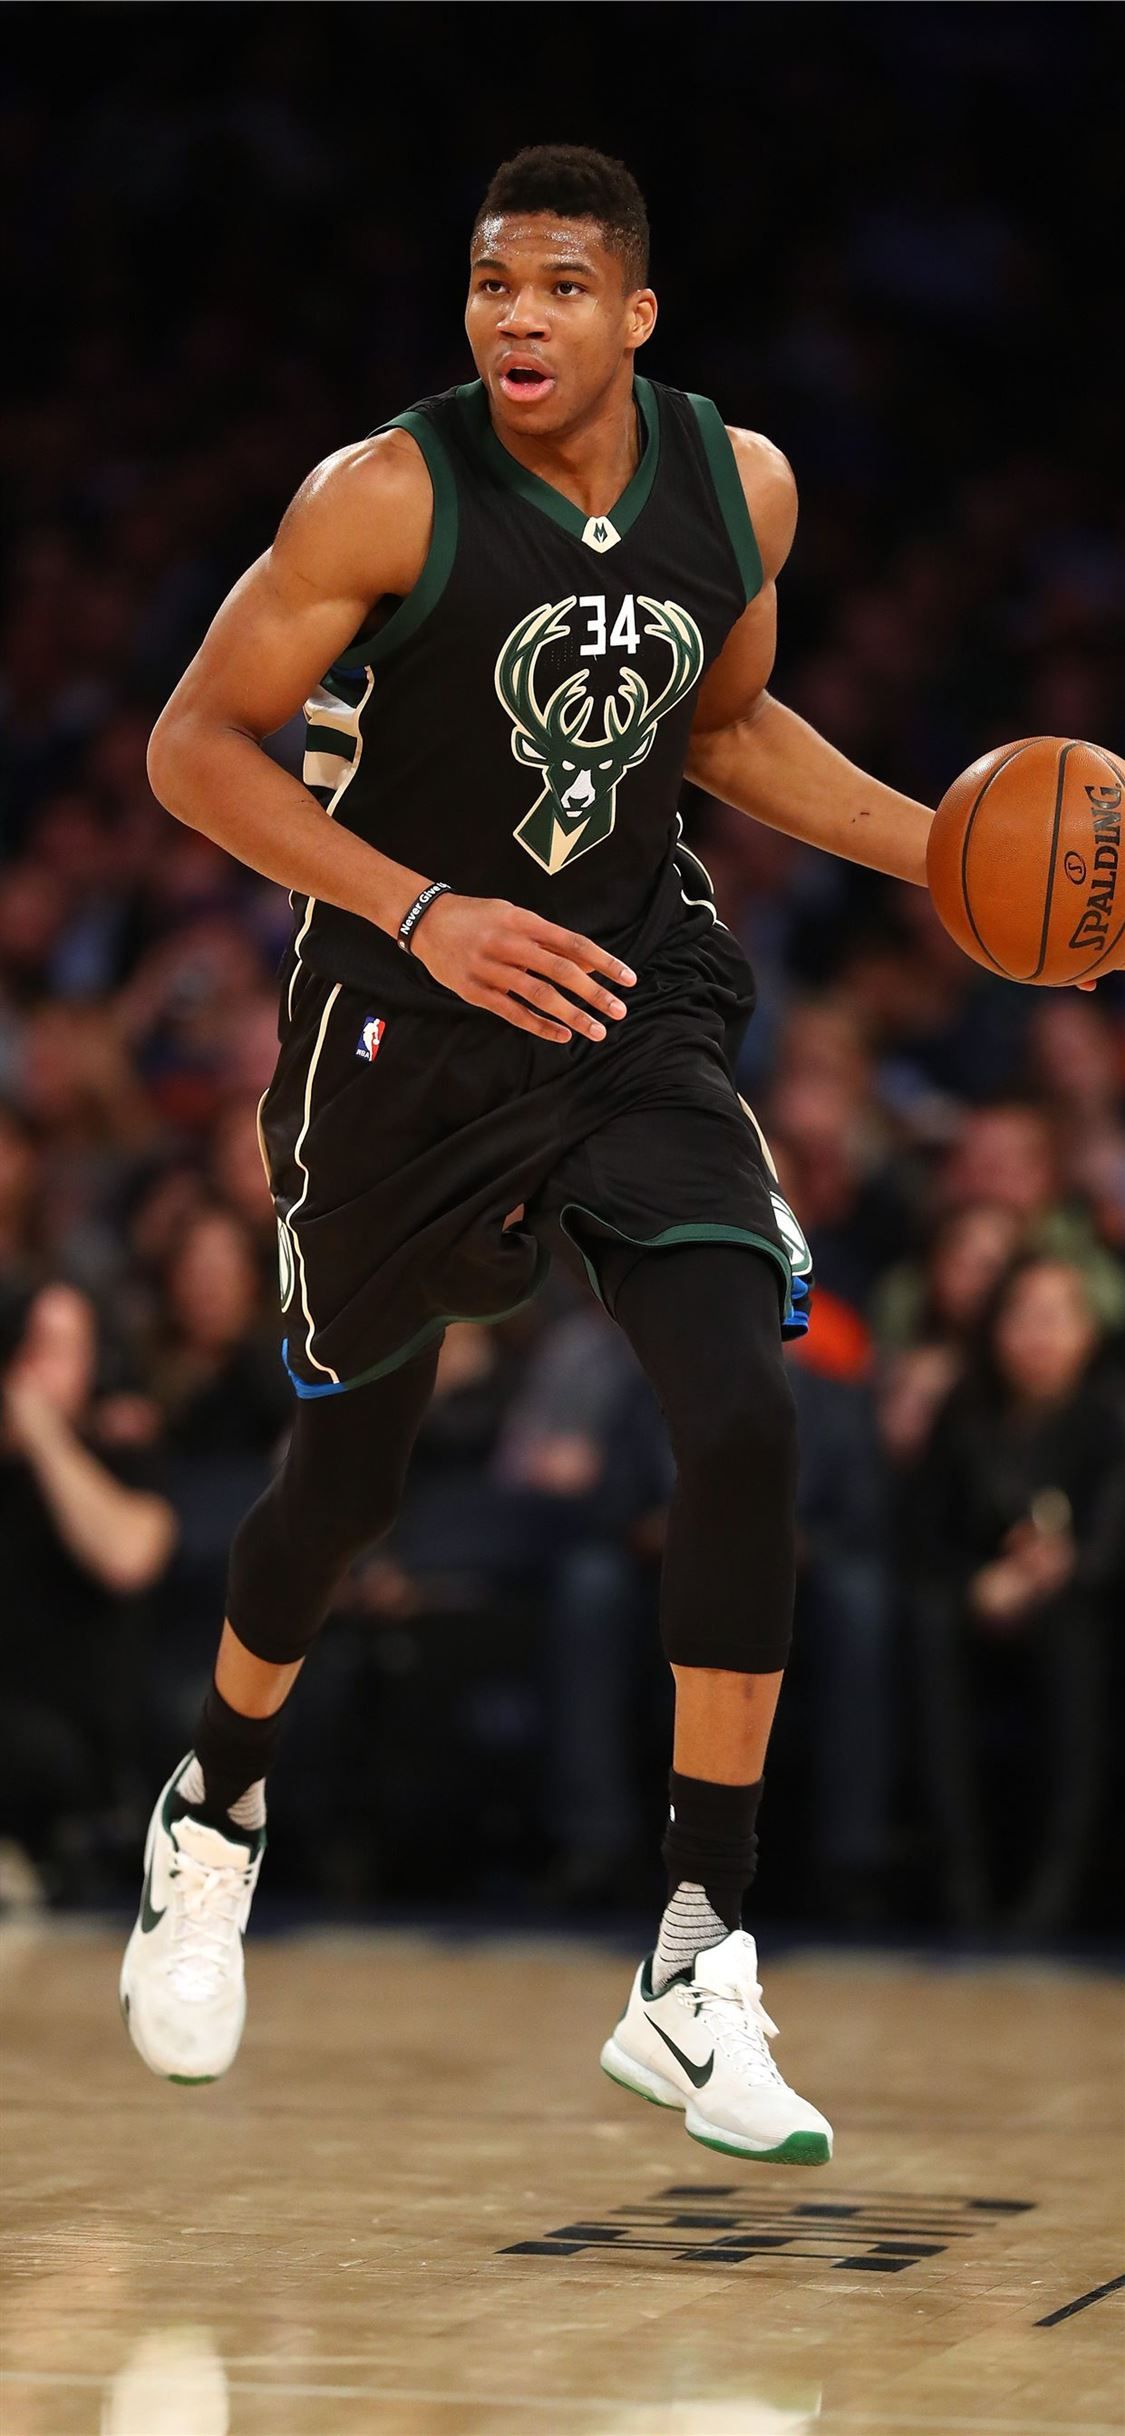 Giannis Wallpaper Browse Giannis Wallpaper with collections of Champion  Dunk Giannis Gia  Giannis antetokounmpo wallpaper Basketball  photography Nba pictures